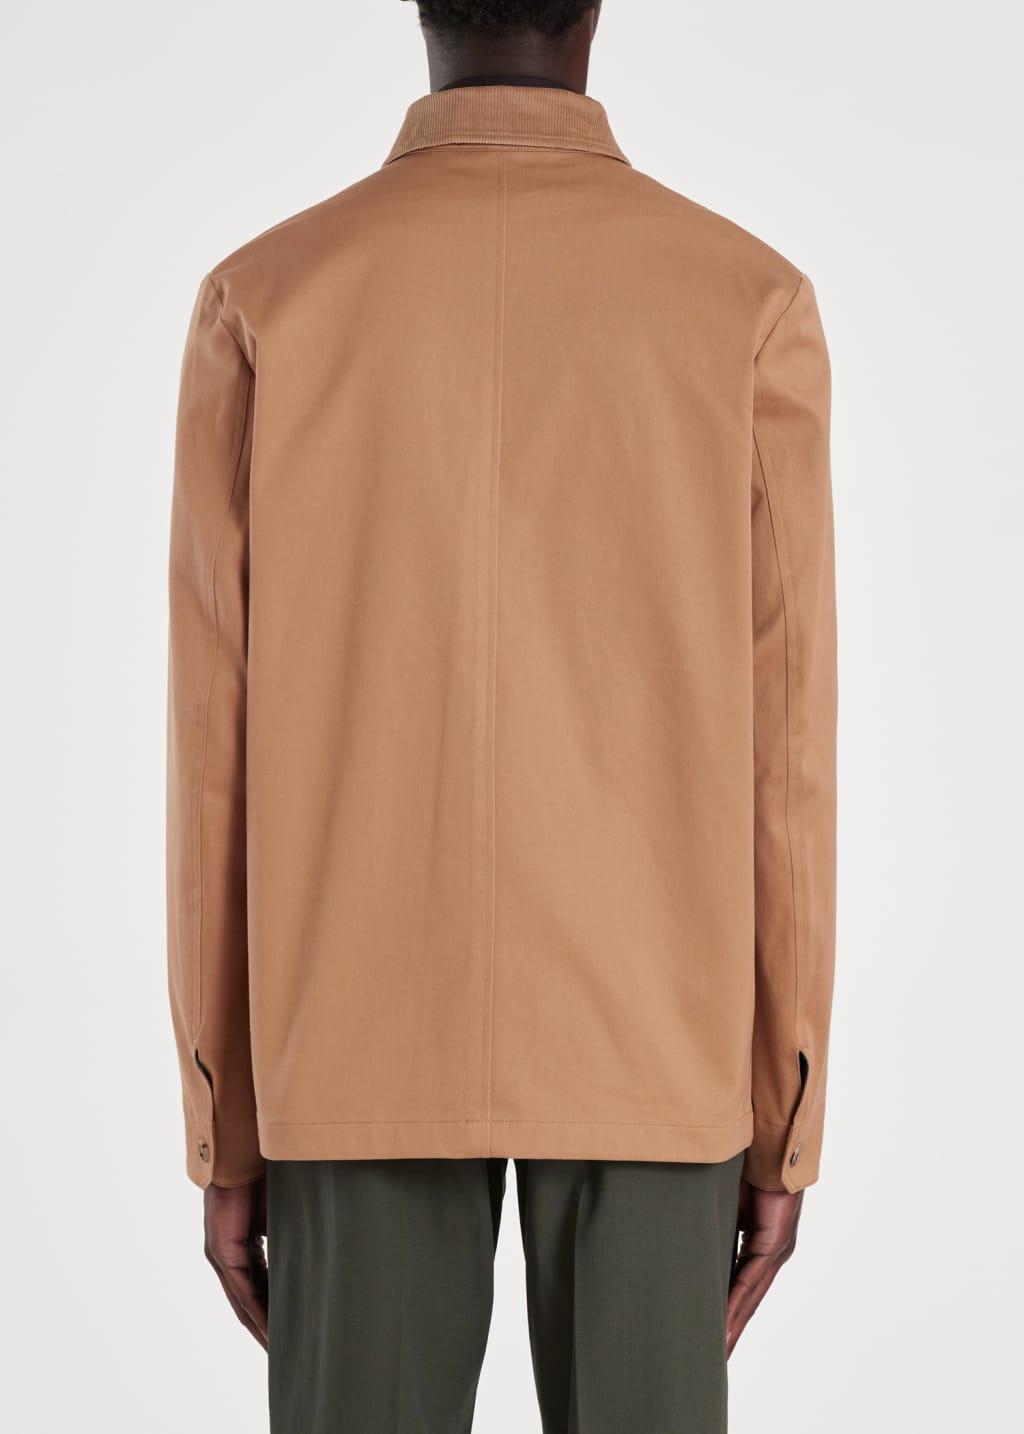 Model View - Tan Cotton-Twill Jacket with Corduroy Collar Paul Smith